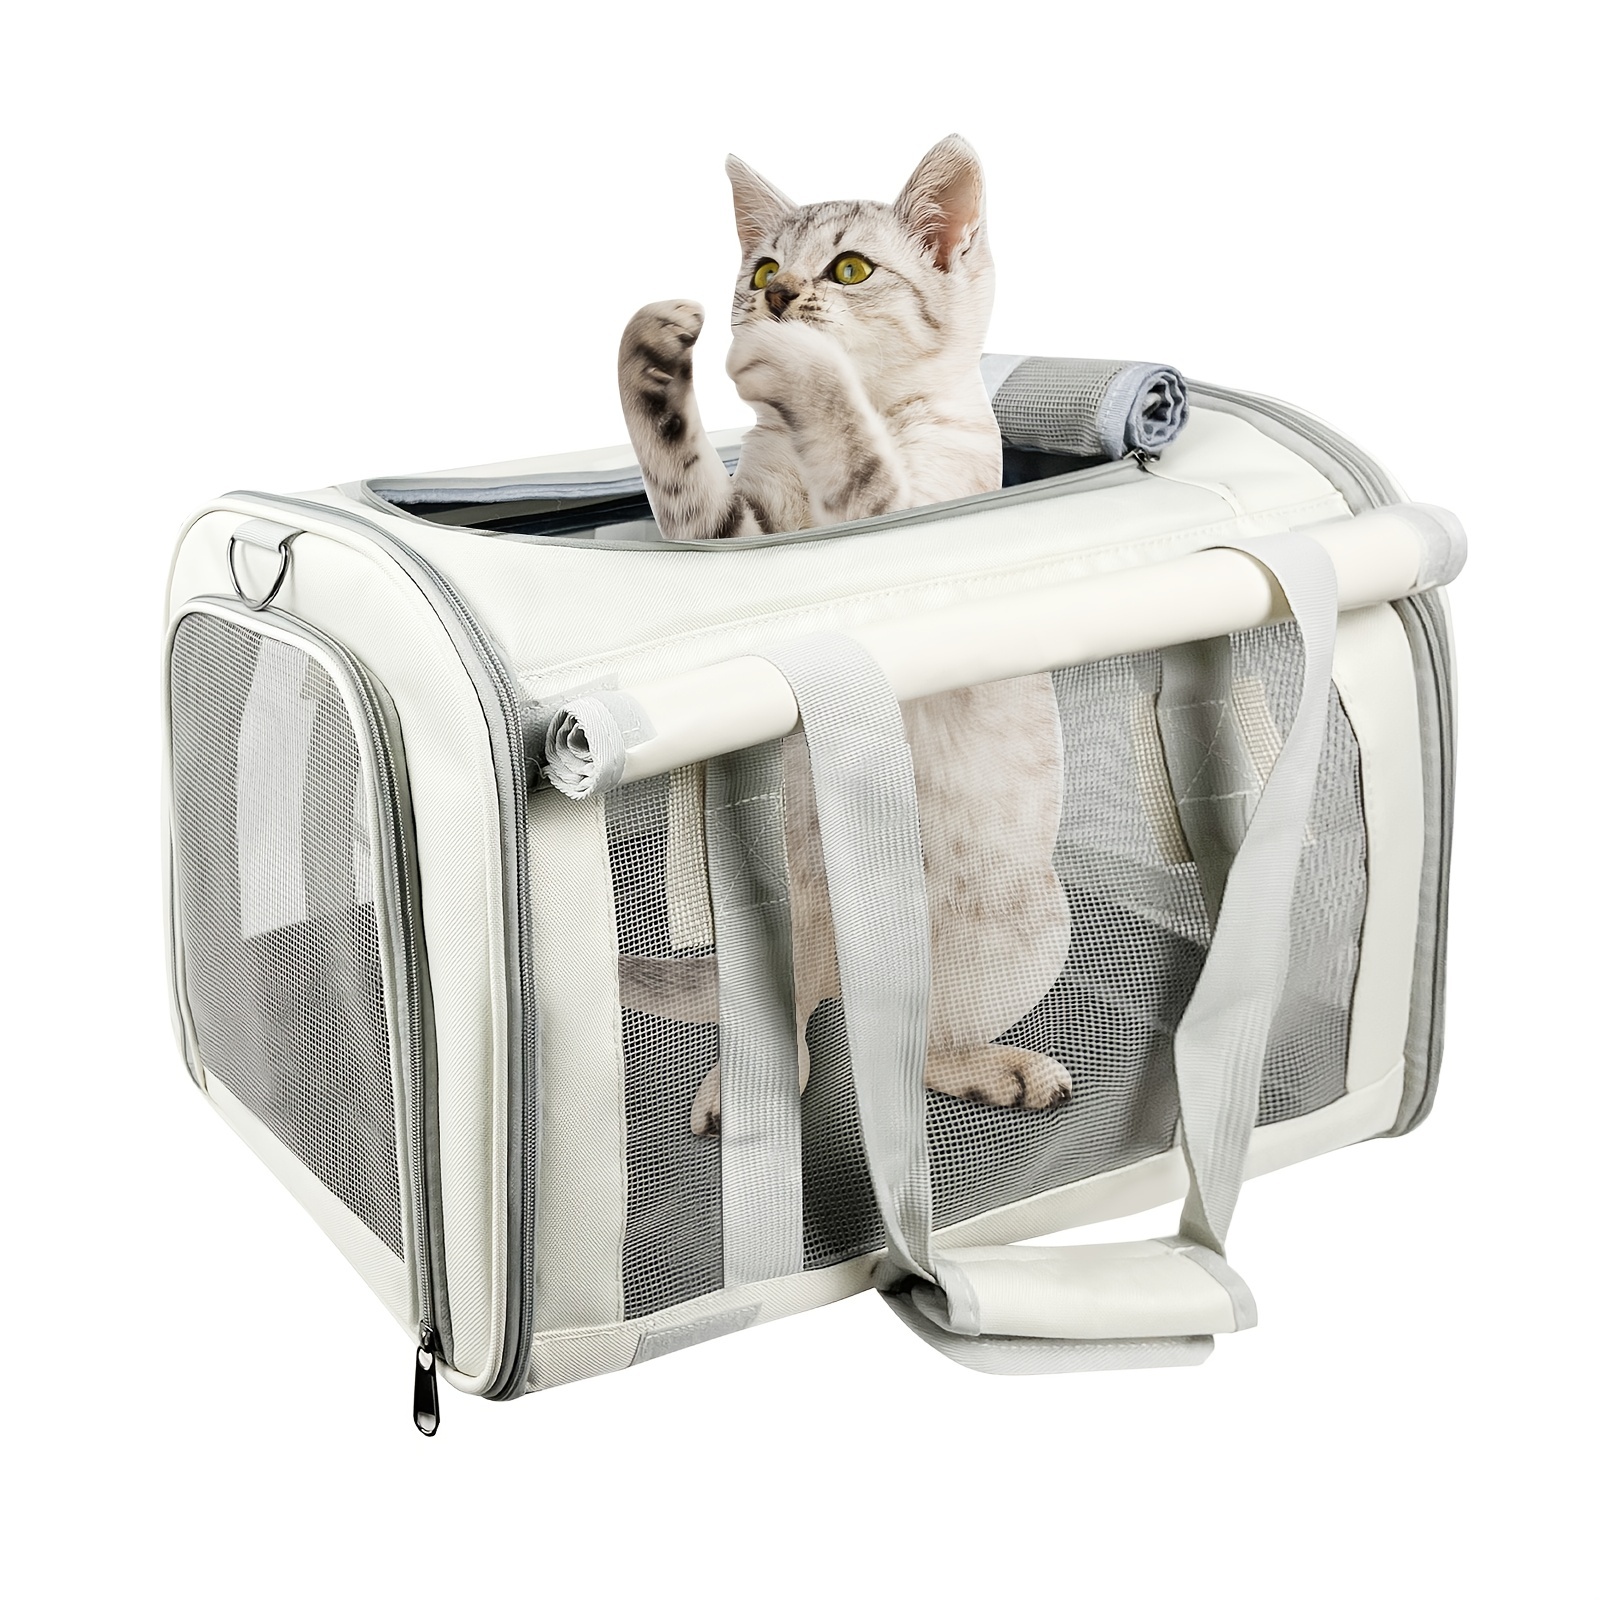 Portable Travel Foldable Cat Carrier Bag - Soft & Durable with Lid - Ivory  White & Black